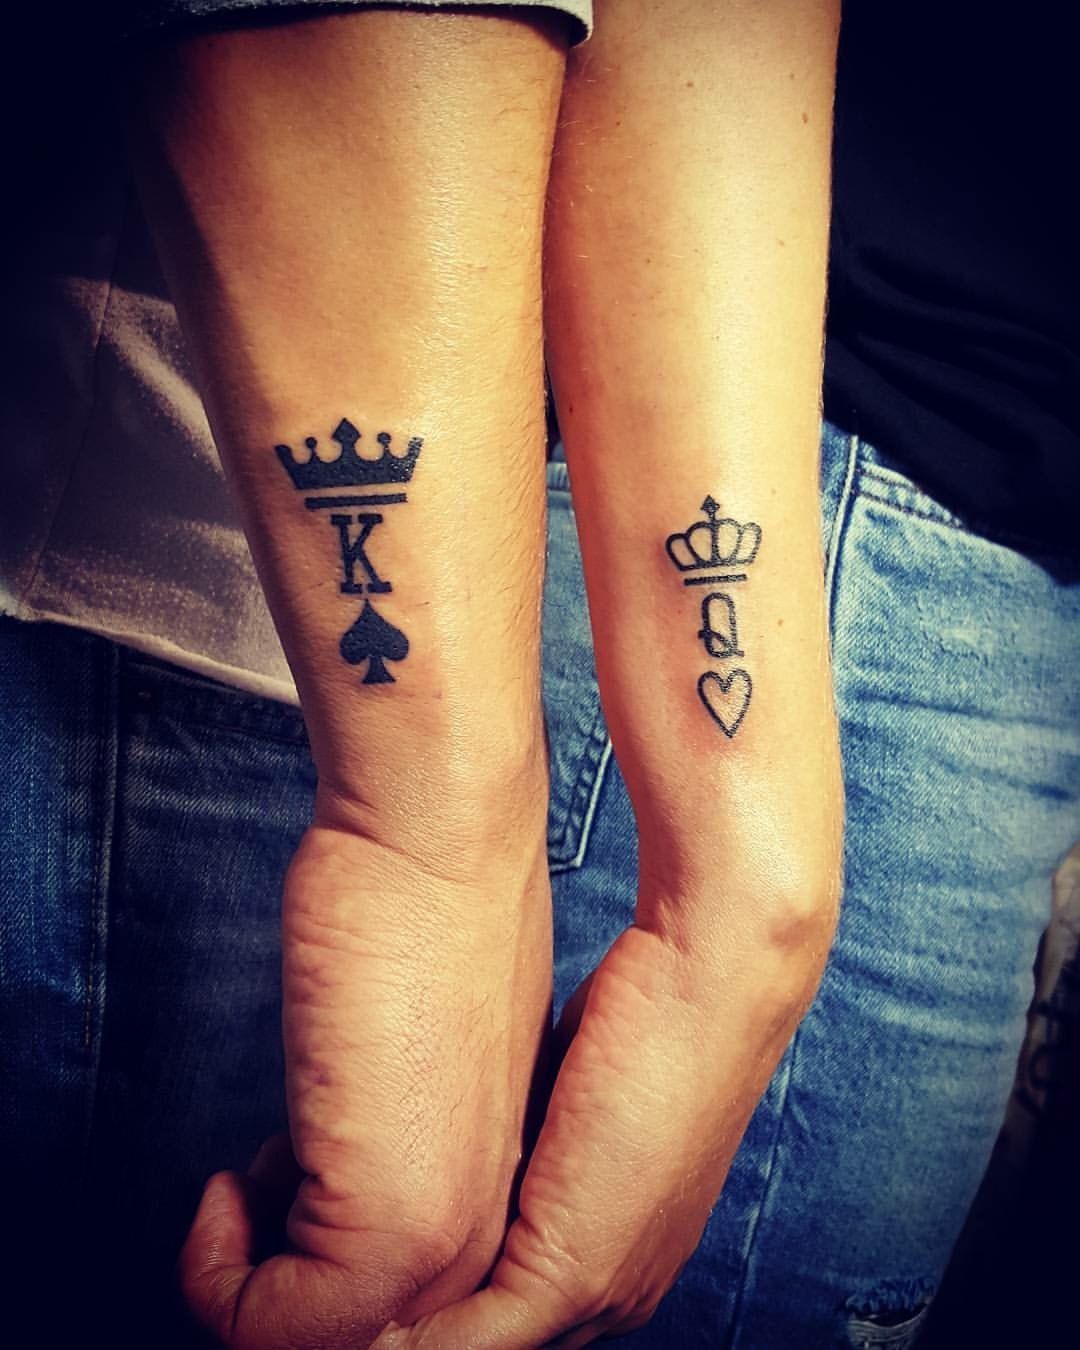 His & Hers King and Queen Tattoo